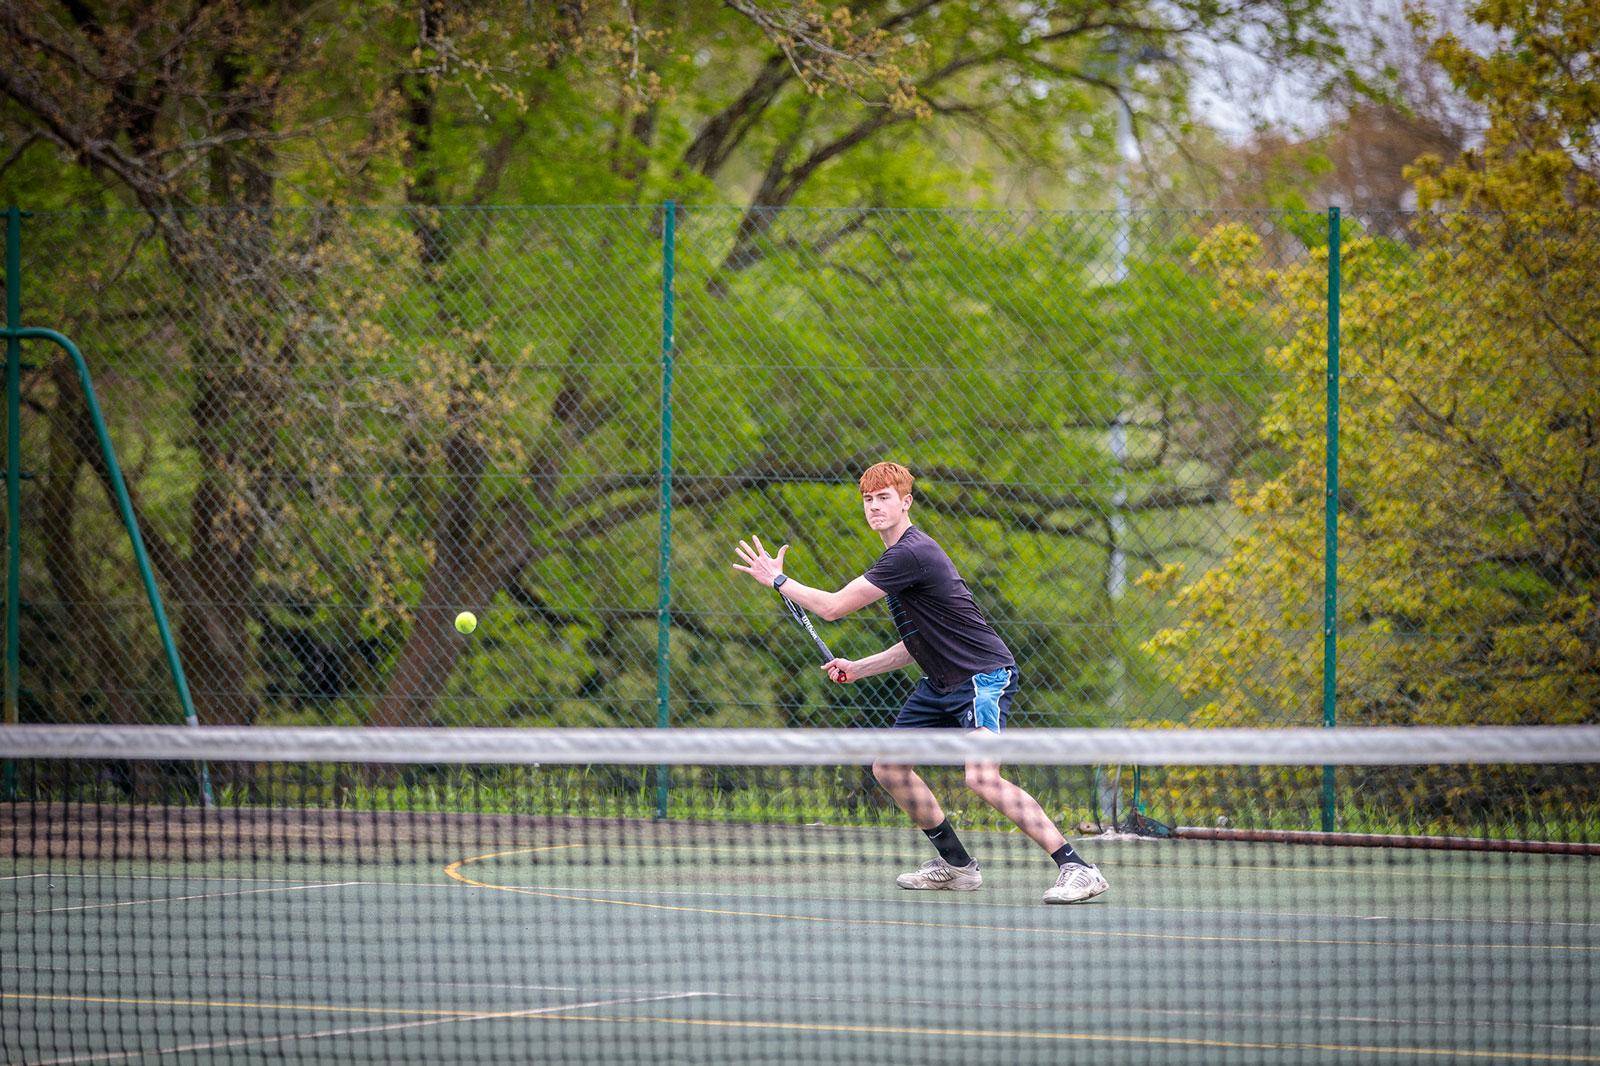 Bedales Senior student playing tennis